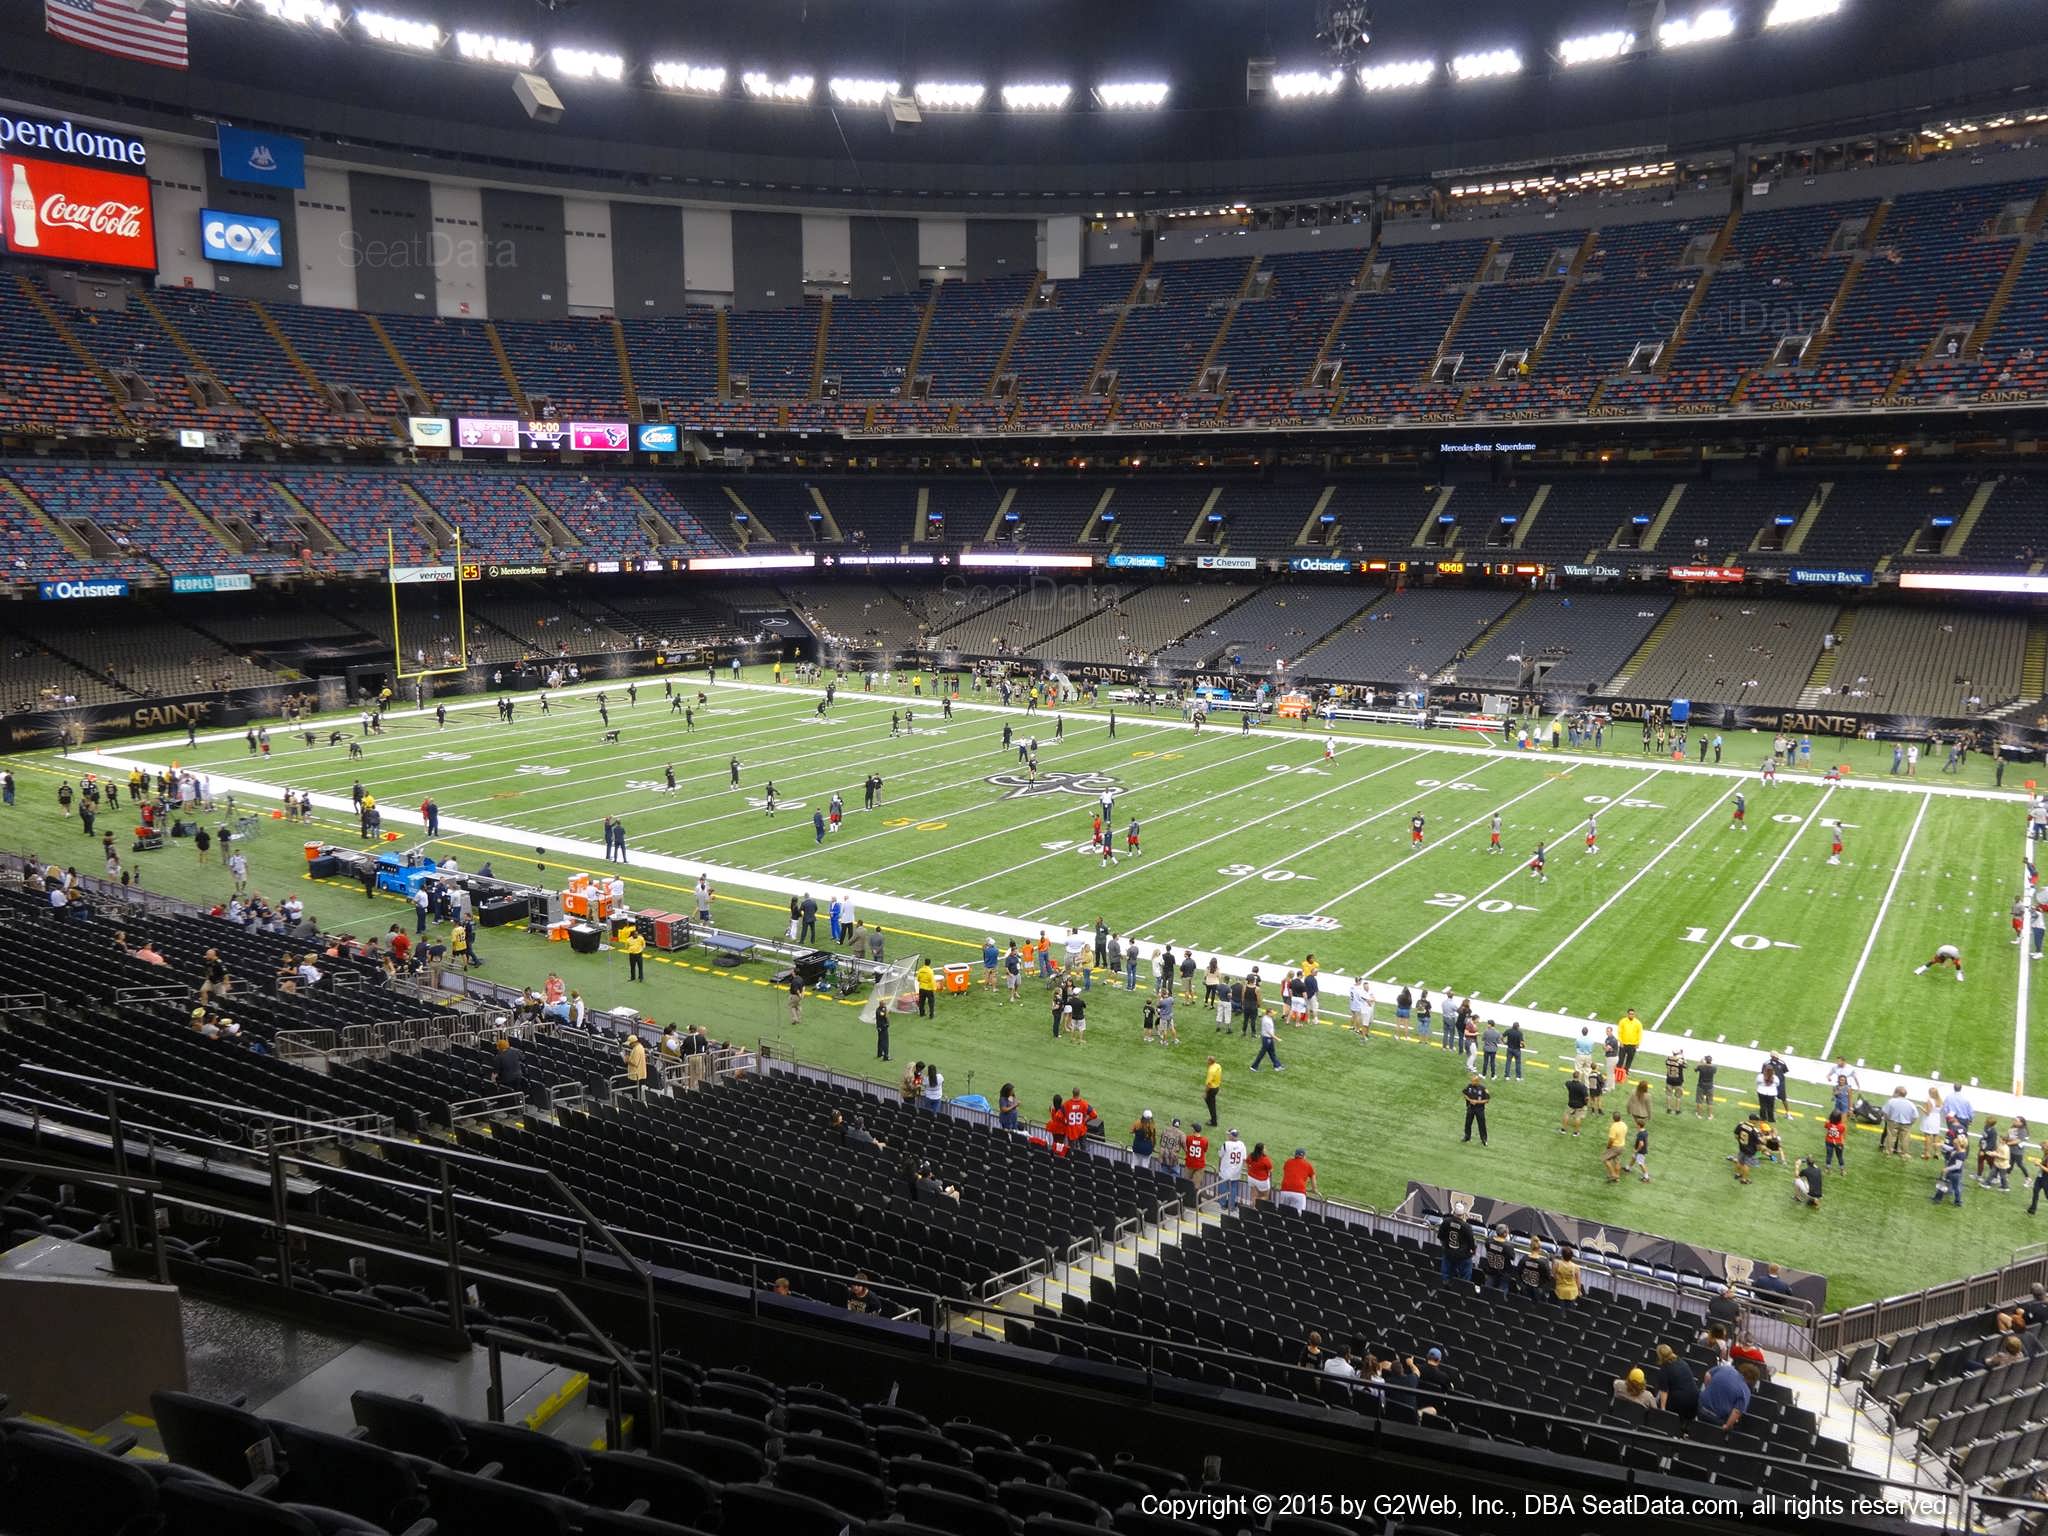 Seat view from section 308 at the Mercedes-Benz Superdome, home of the New Orleans Saints